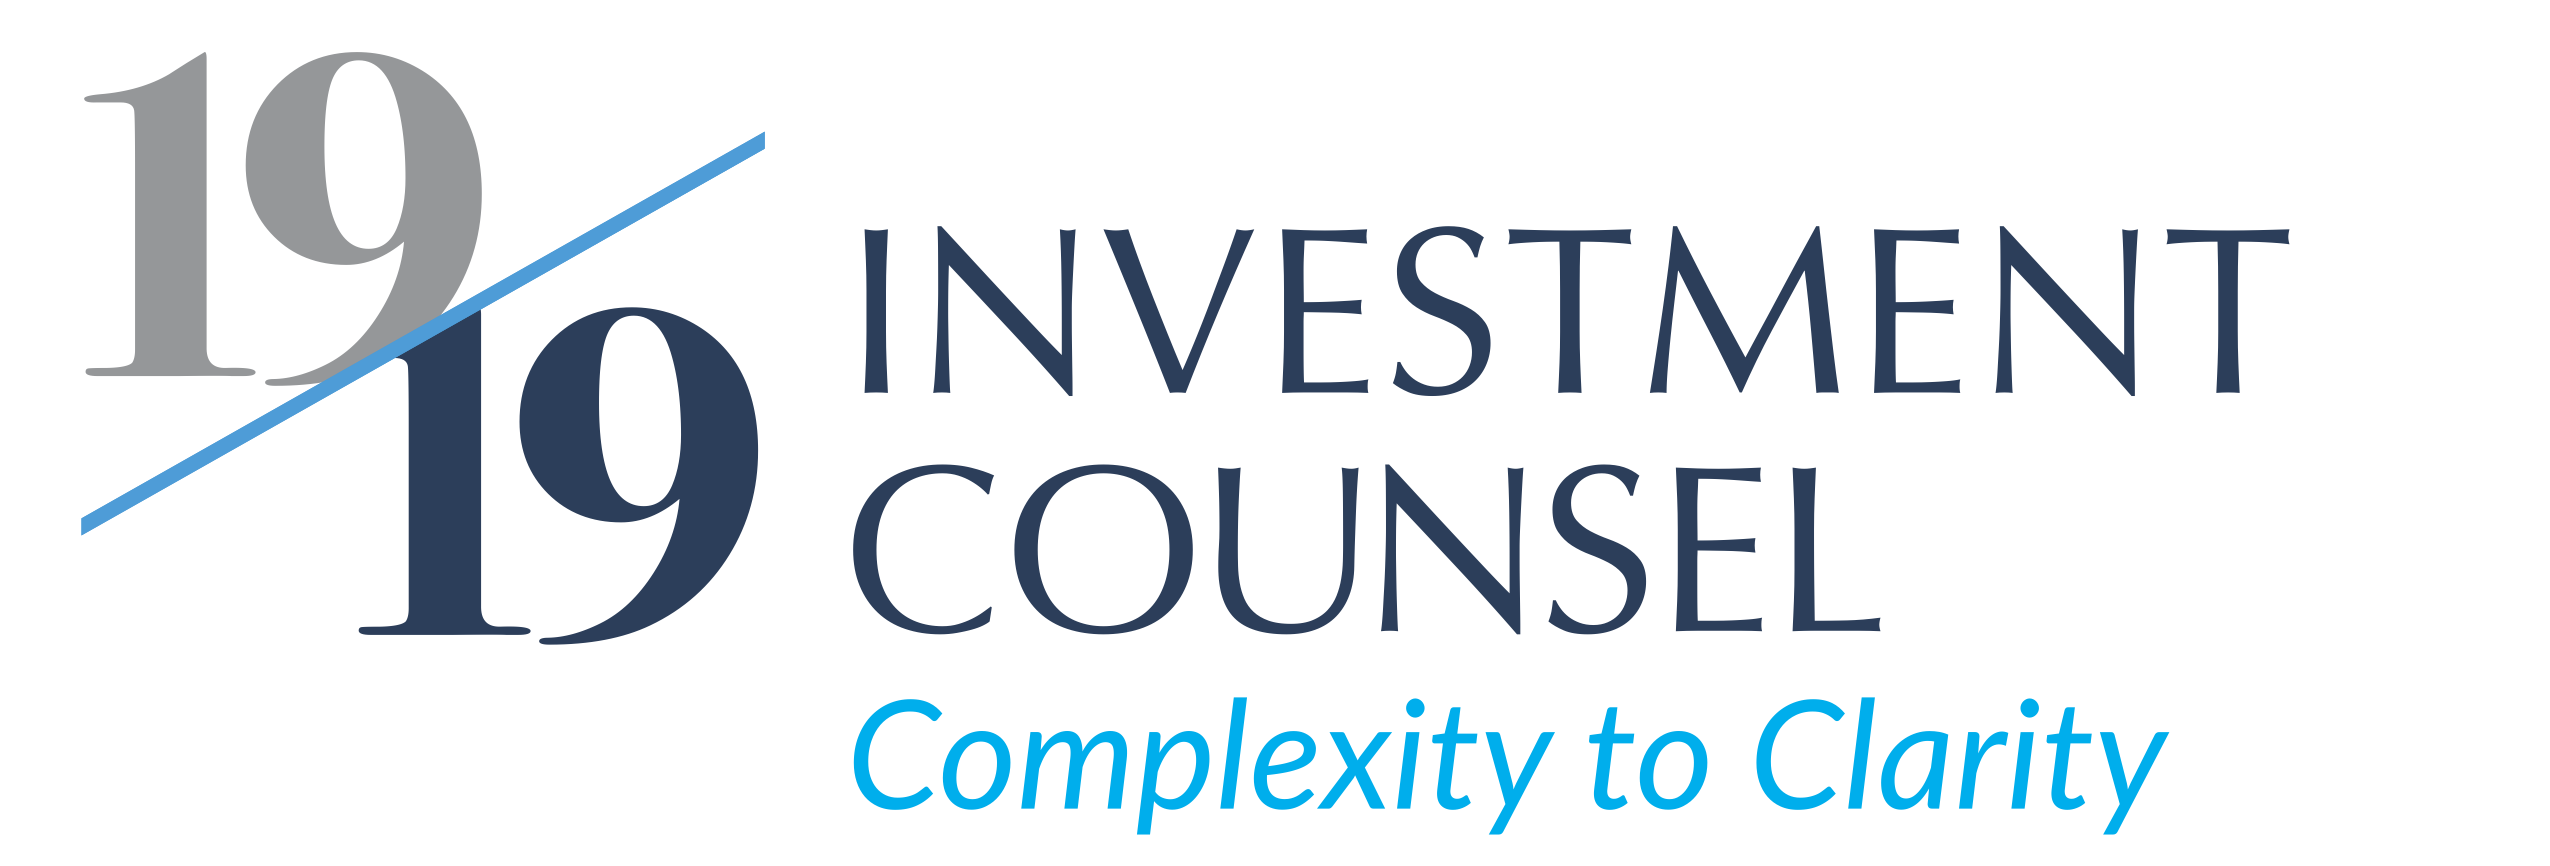 1919 Investment Counsel